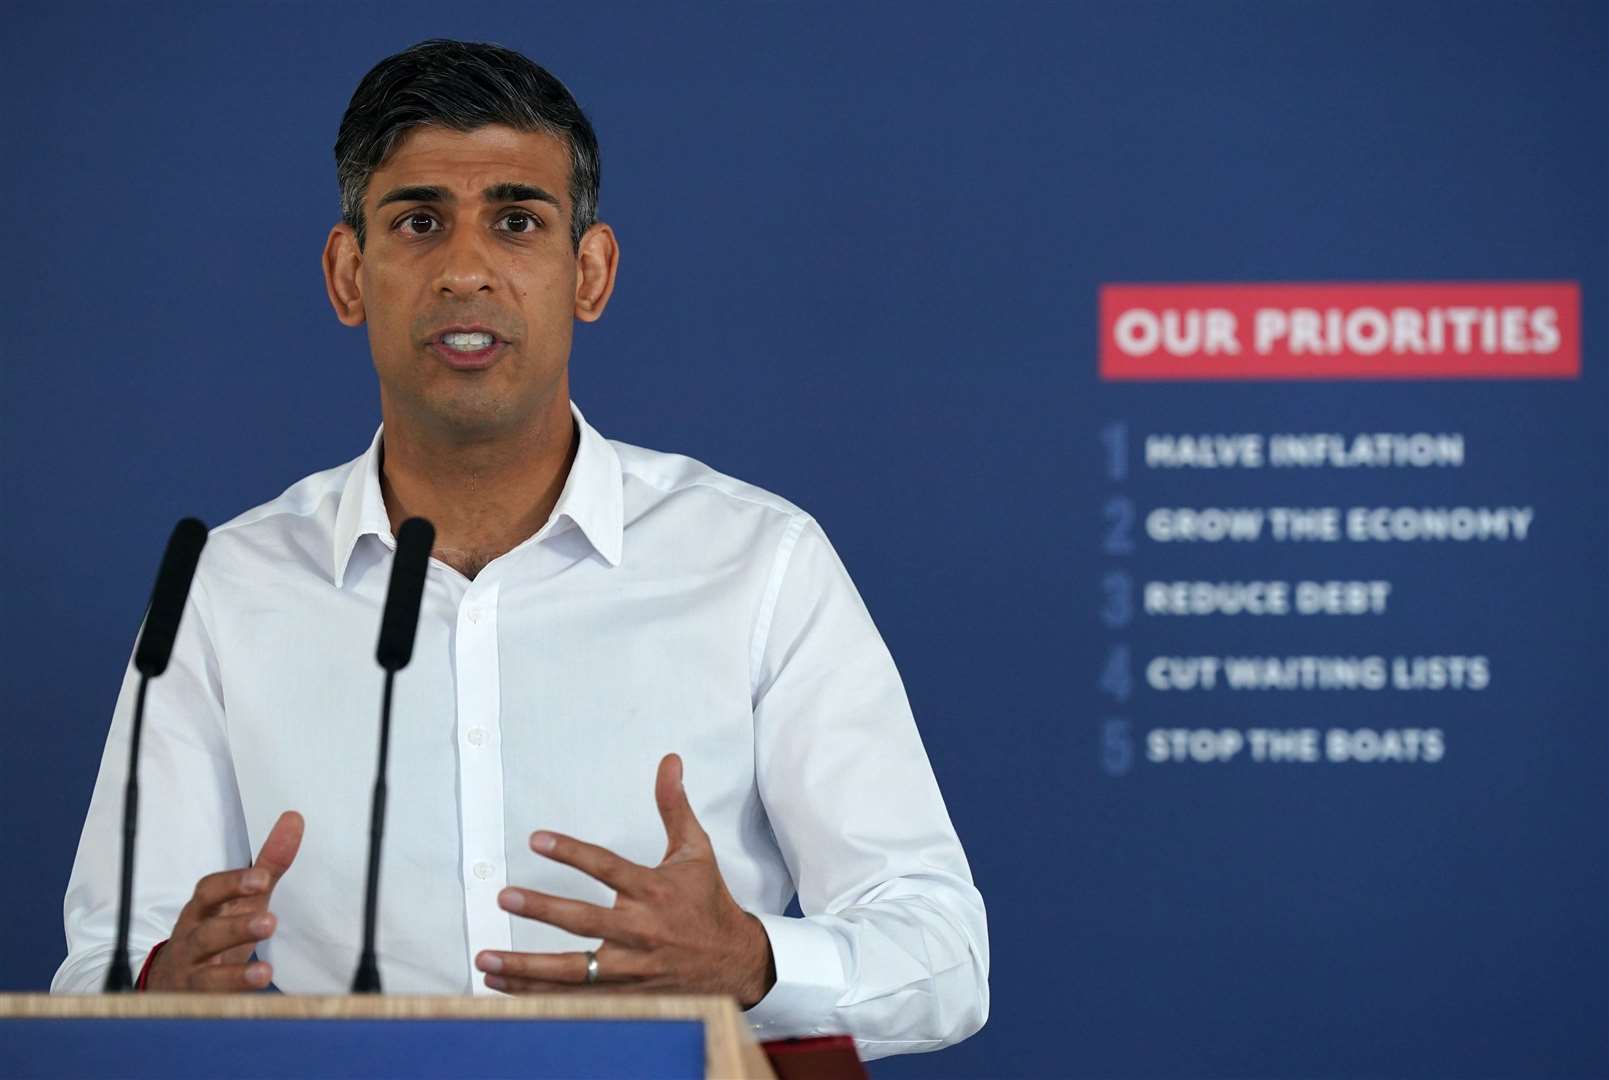 A majority of the public said it was clear what Rishi Sunak stands for, but the Prime Minister trailed his opponent on most questions in the Ipsos poll. (Yui Mok/PA)